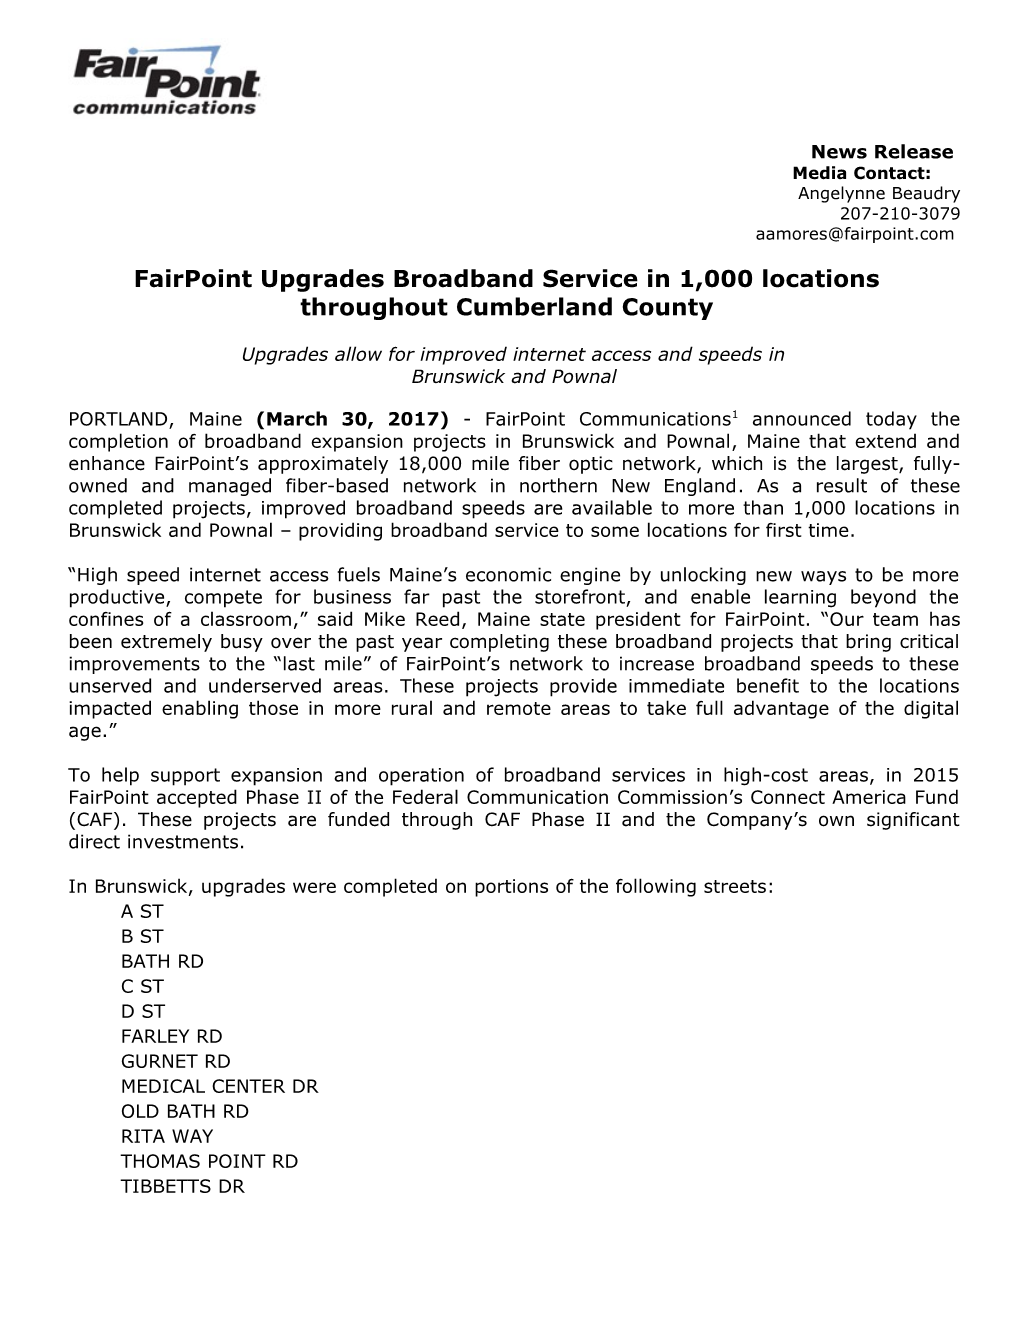 Fairpoint Upgrades Broadband Service in 1,000 Locations Throughout Cumberland County